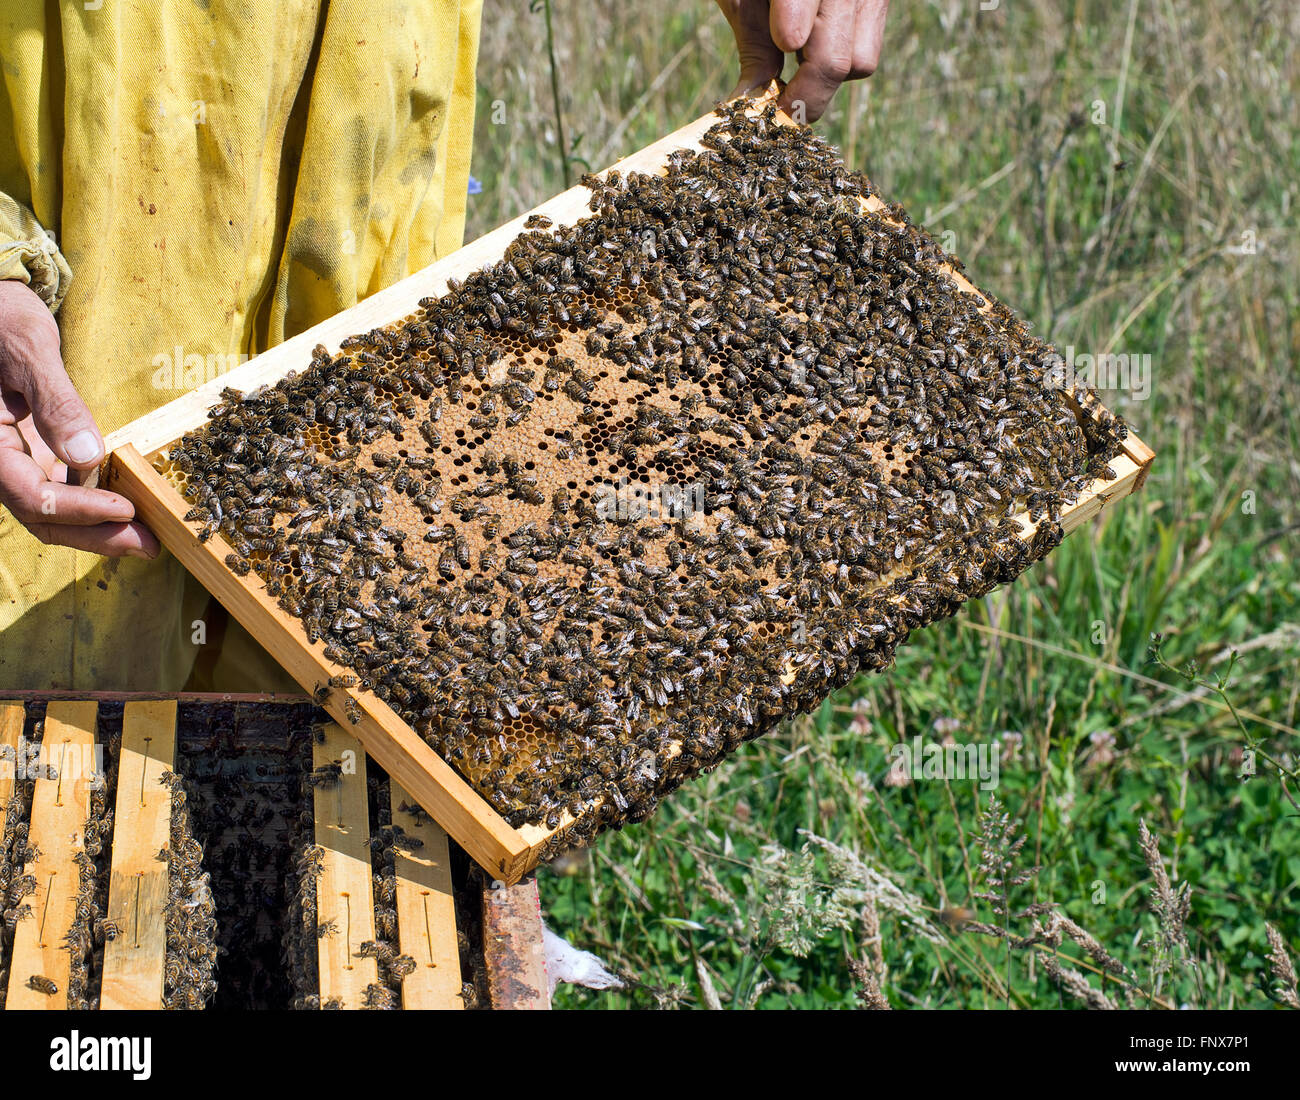 Apiculture detail, Beekeeper checking frame. Stock Photo